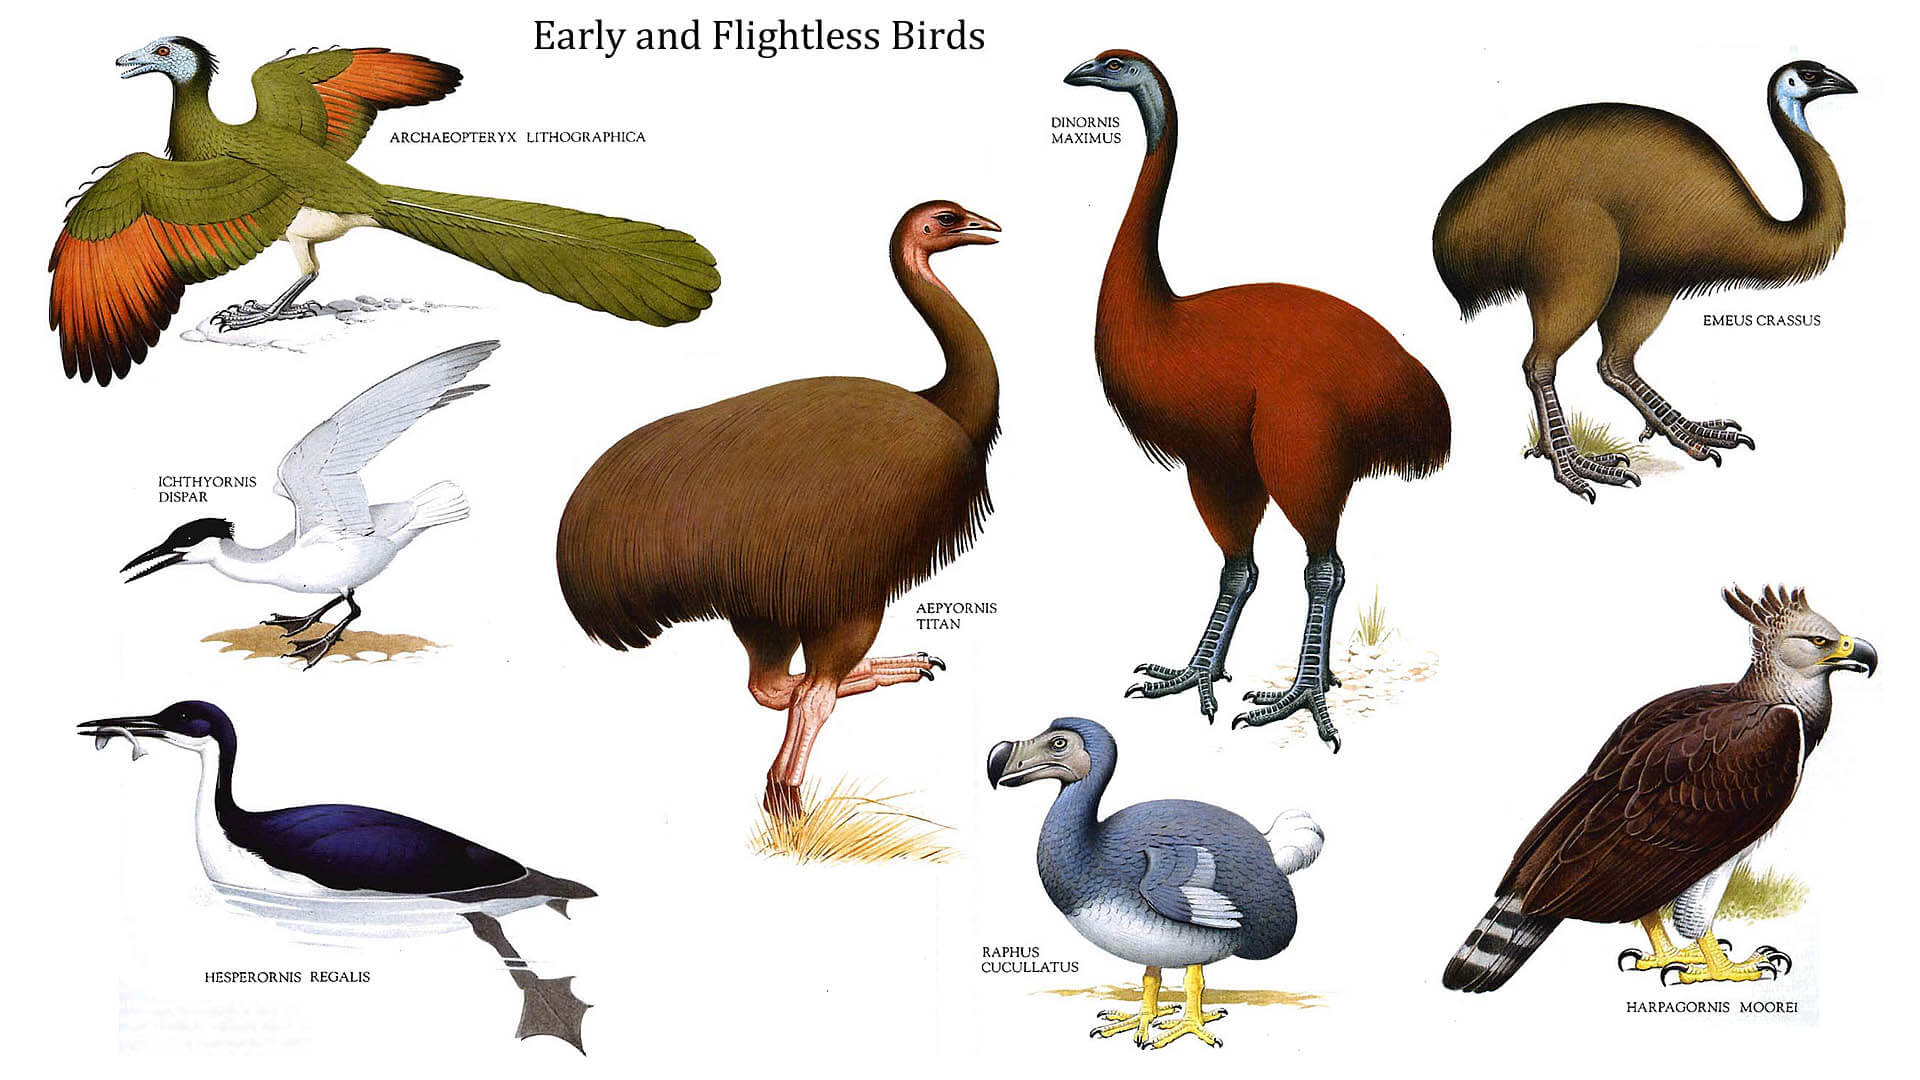 How many species of flightless birds are there?